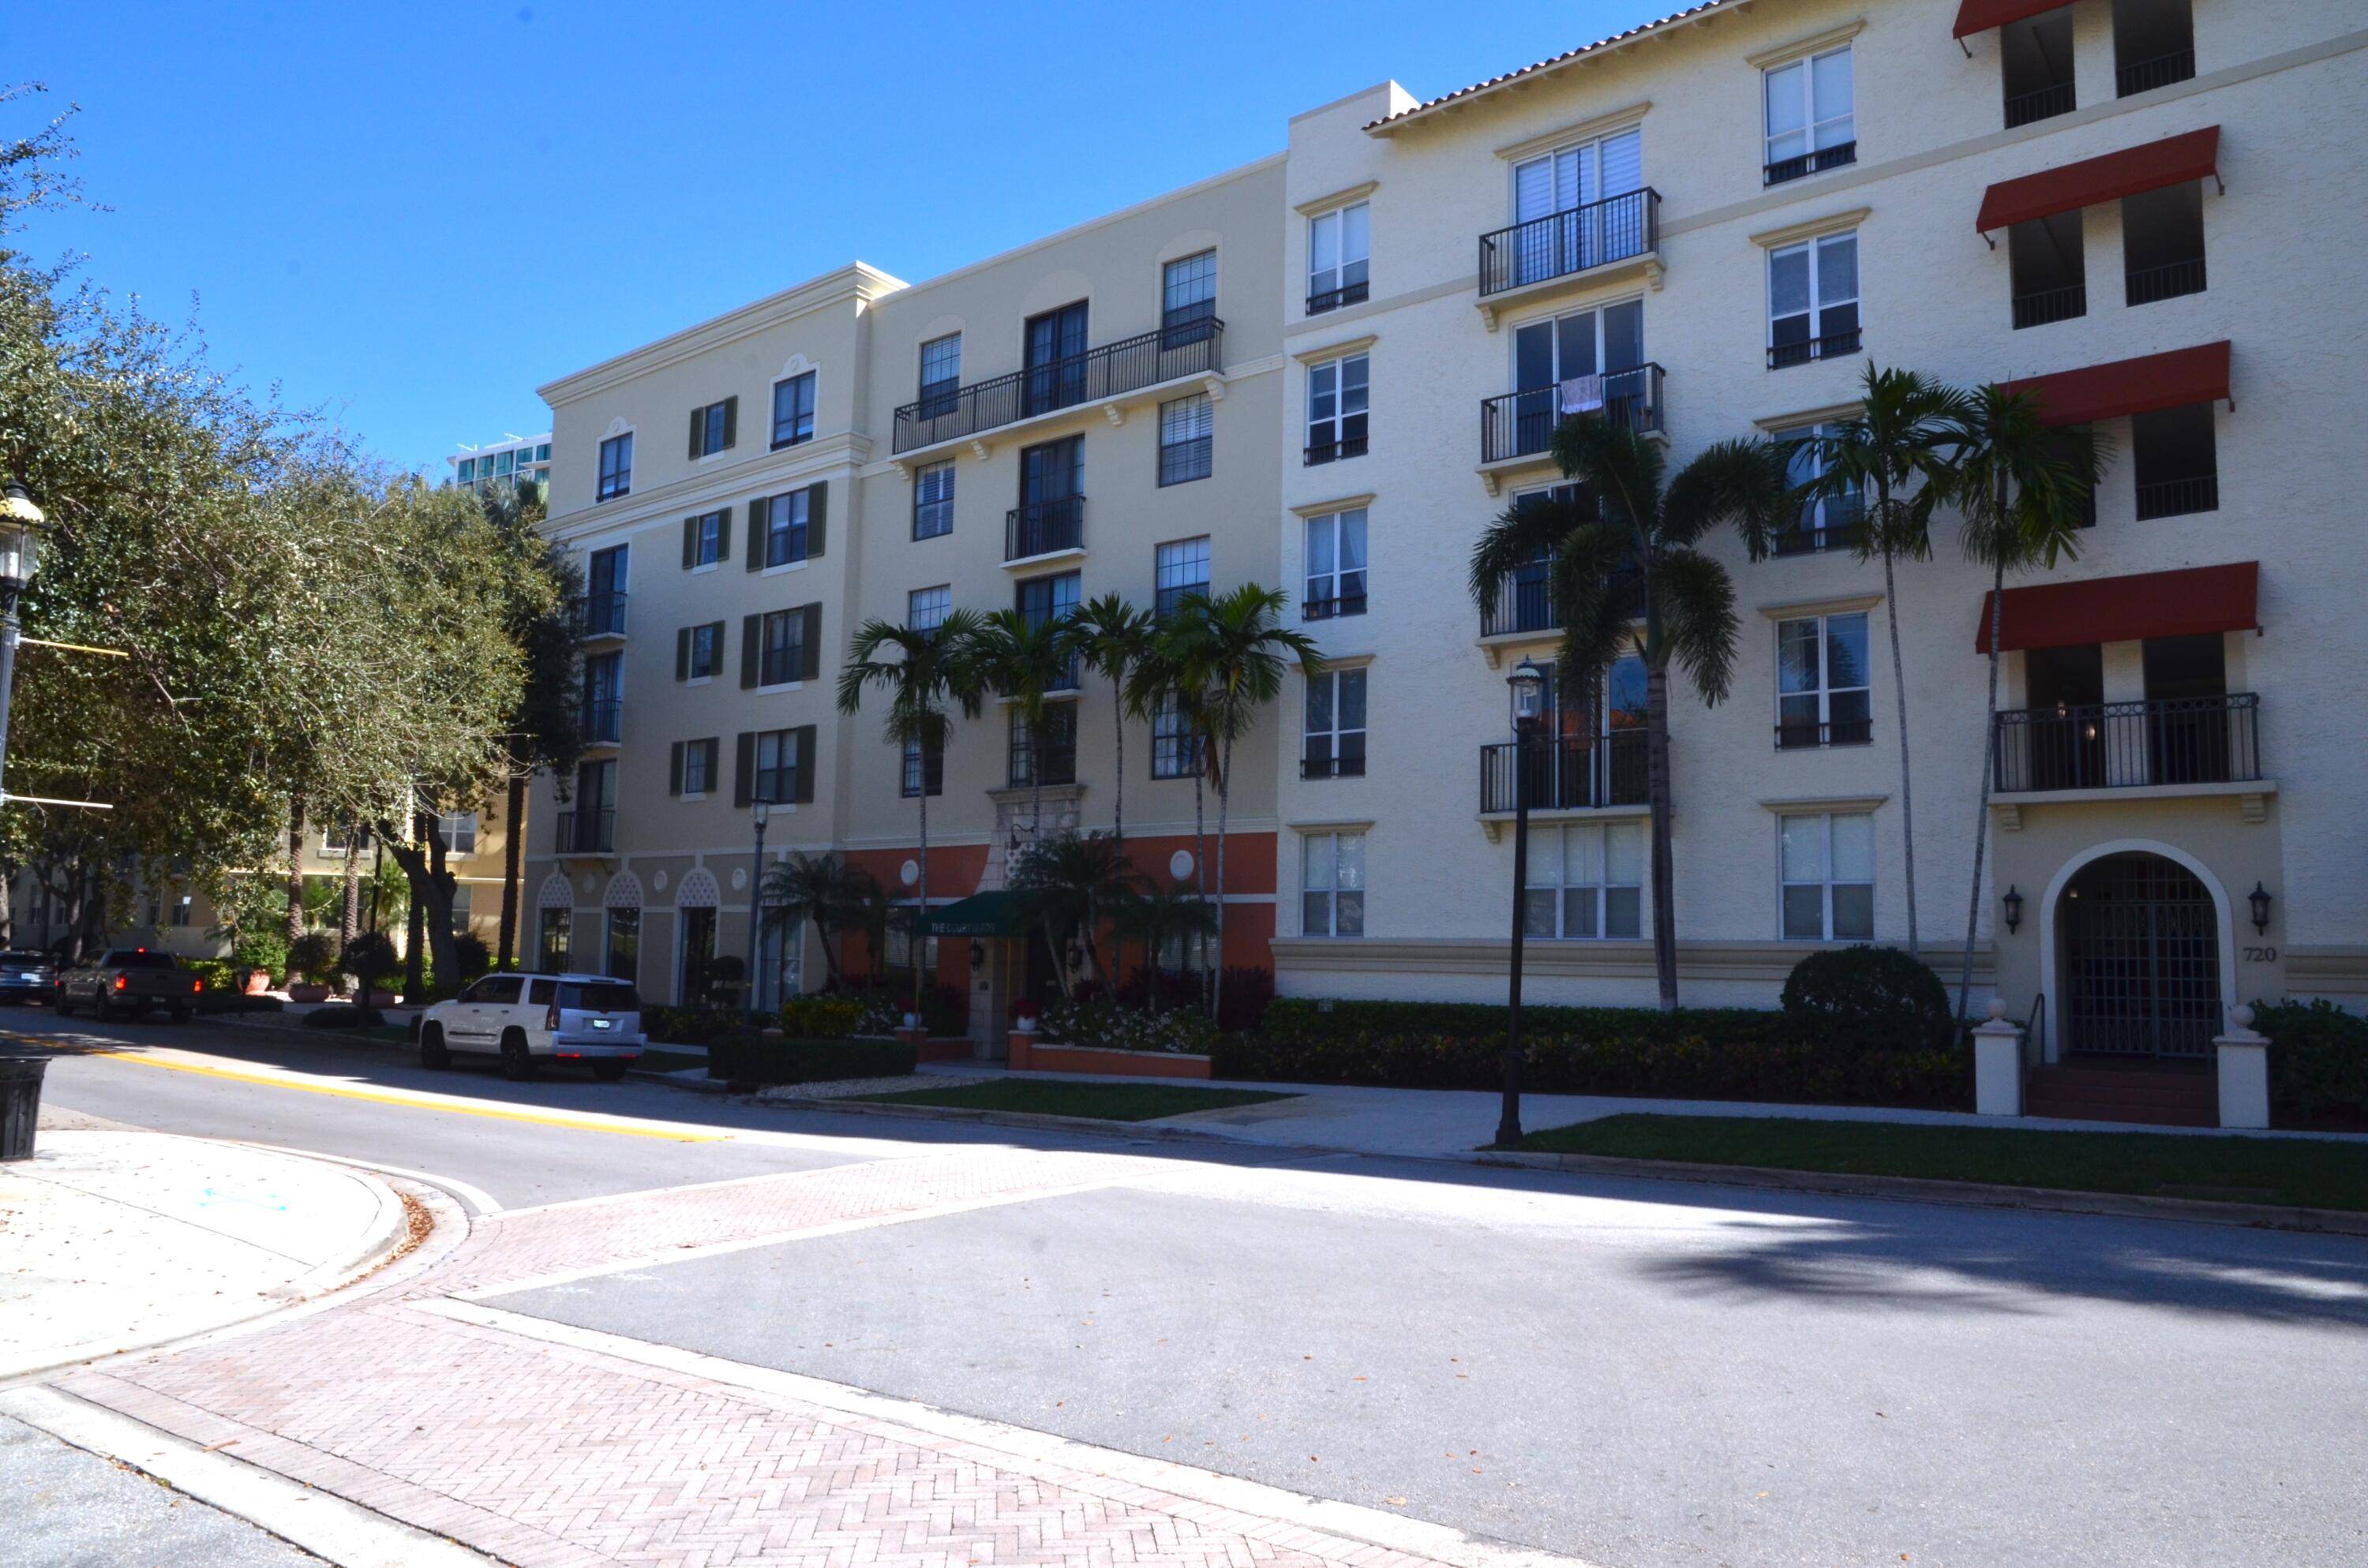 Welcome to your downtown oasis in West Palm Beach !